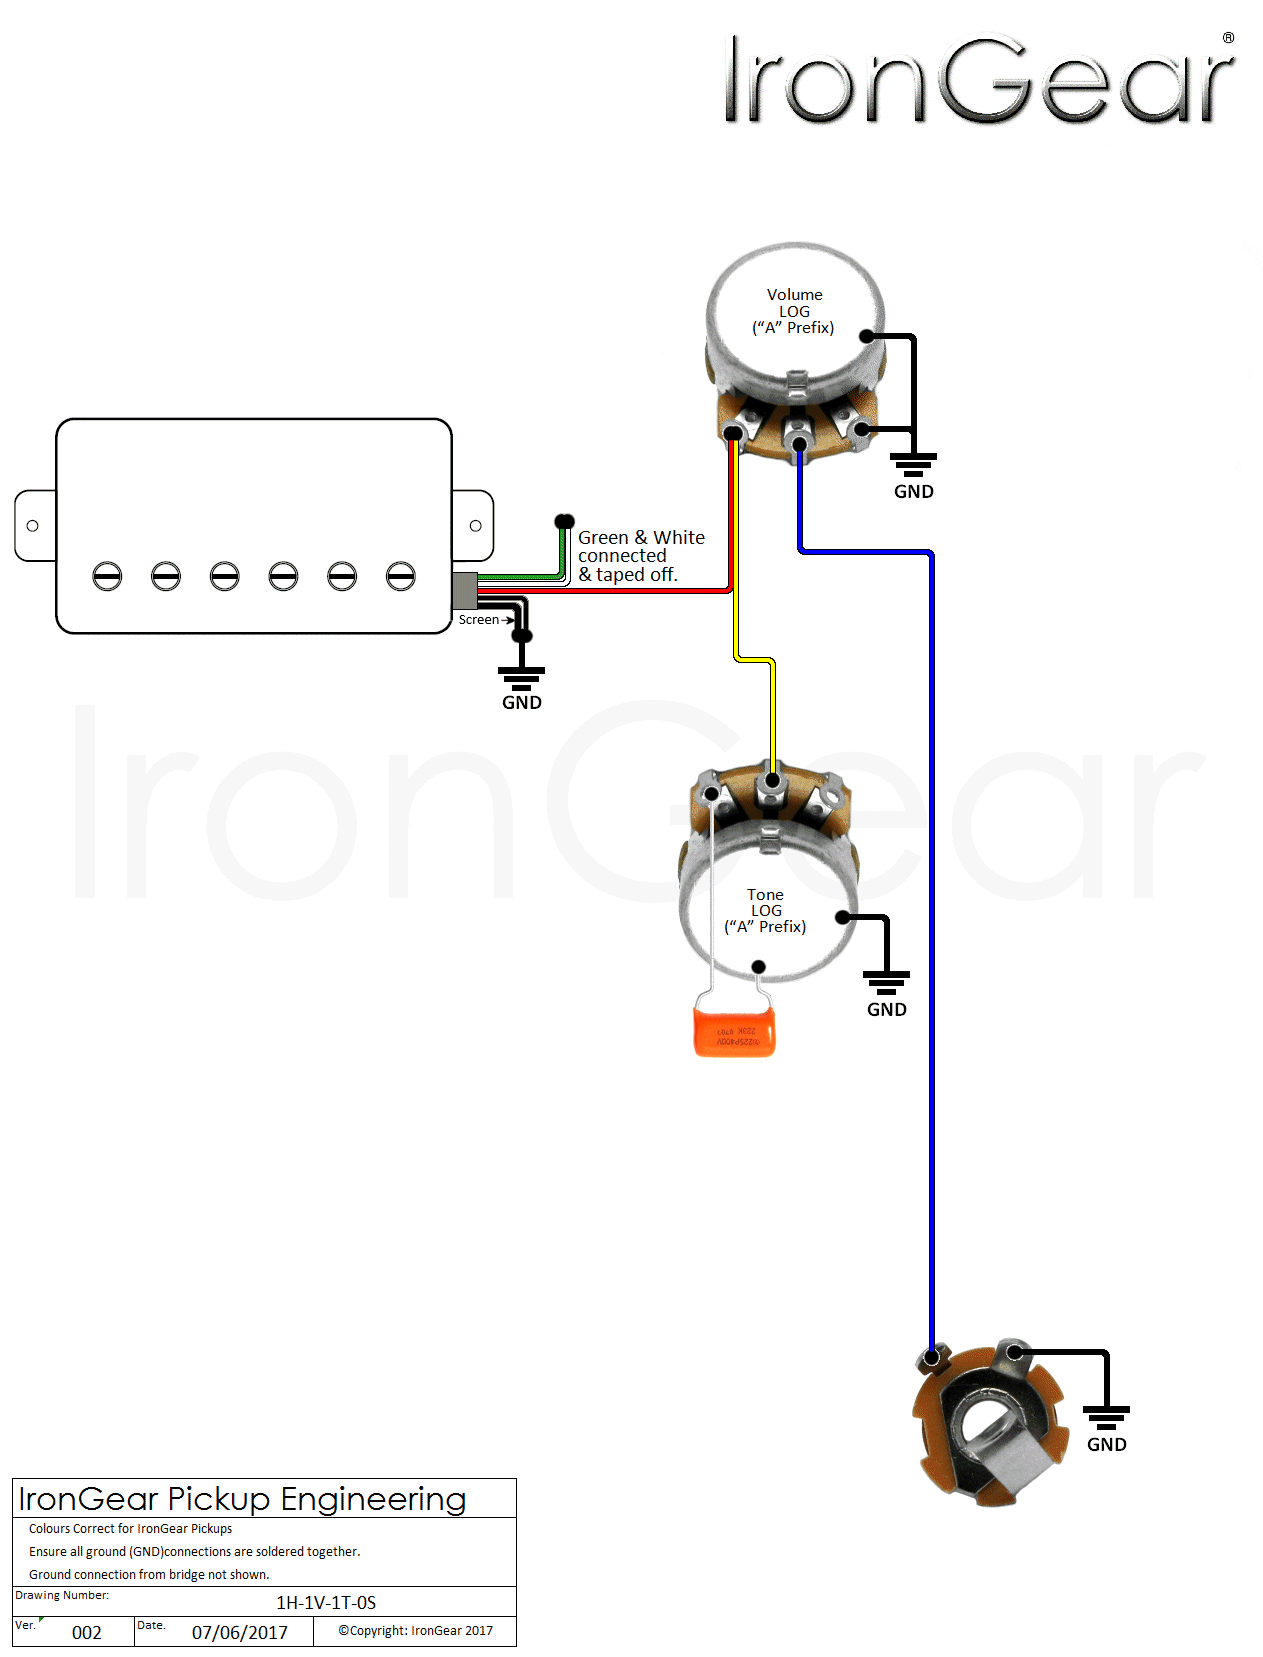 Wiring Diagram For One Humbucker With One Volume One Tone from www.irongear.co.uk